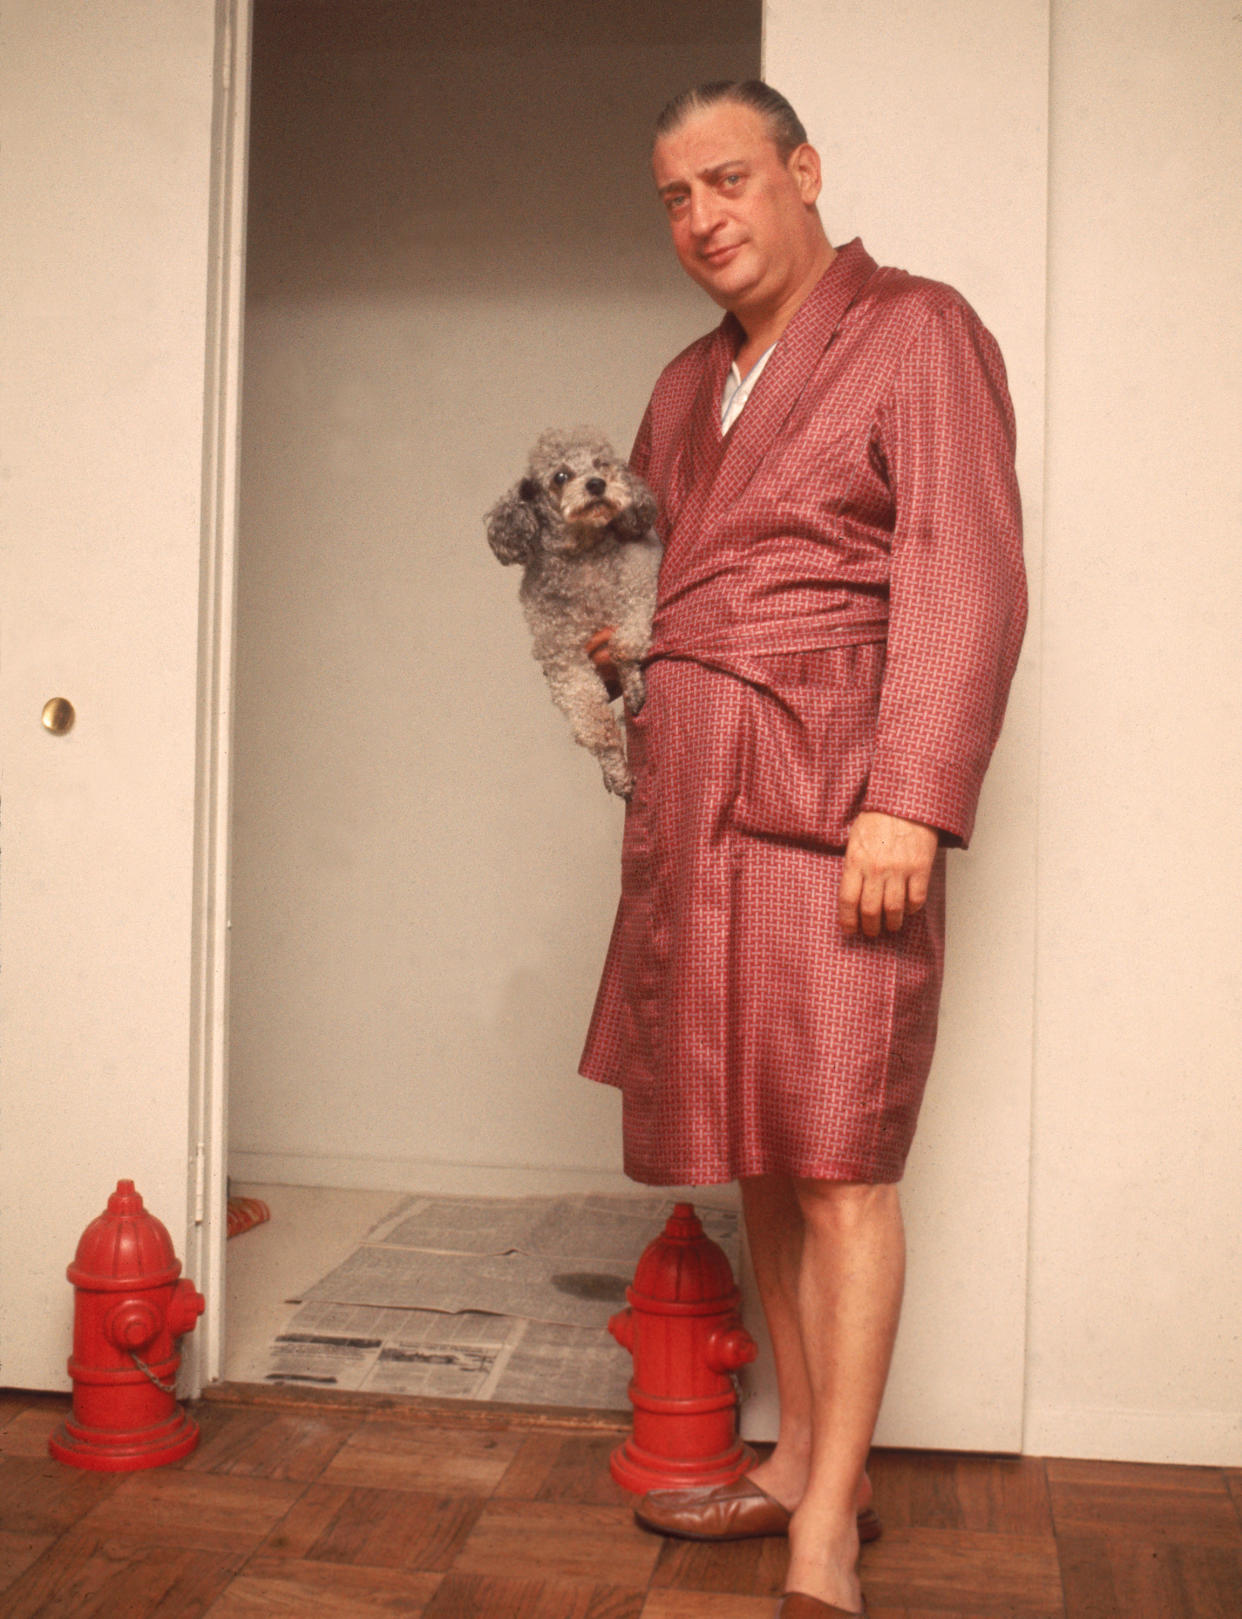 https://www.gettyimages.co.uk/detail/news-photo/american-comedian-rodney-dangerfield-stands-in-a-bathrobe-news-photo/72182833